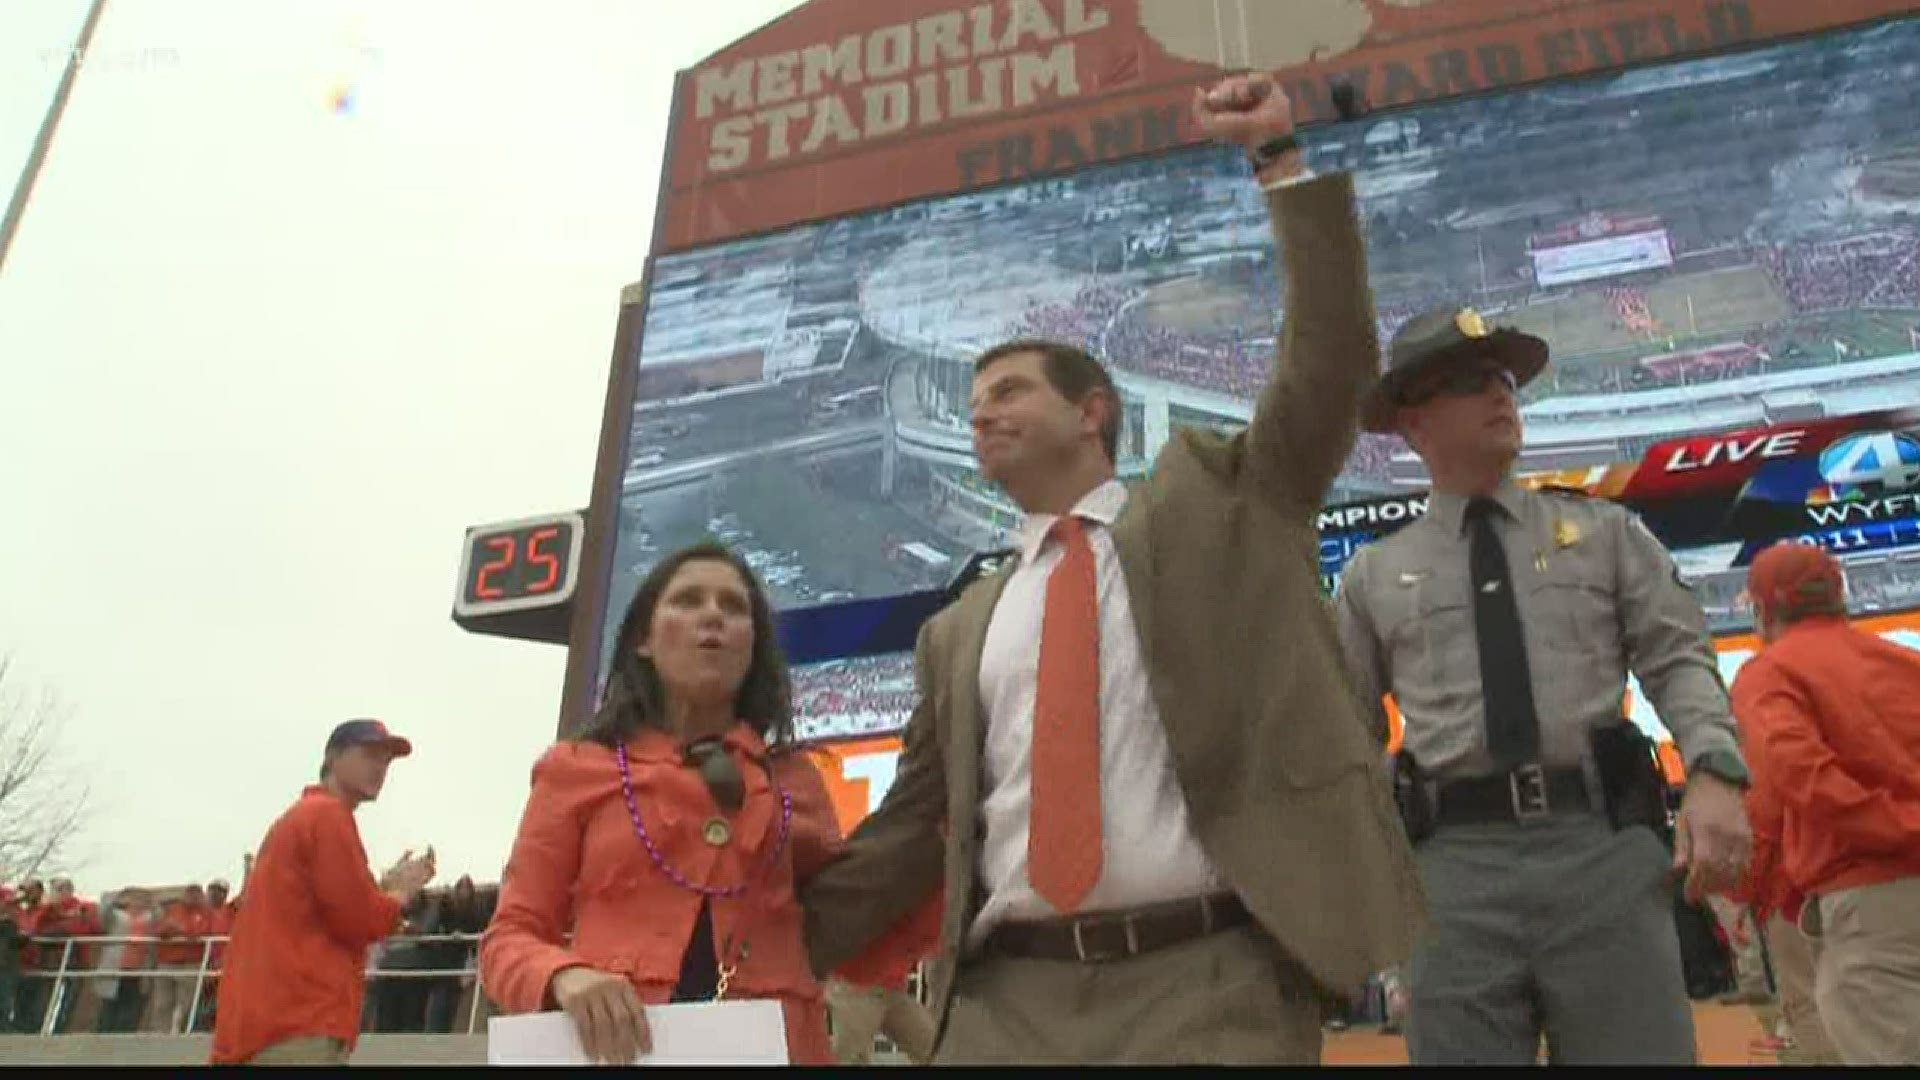 A virtual fundraising event raised nearly $1 million dollars for the All In Team Foundation which was created by Dabo and Kathleen Swinney.